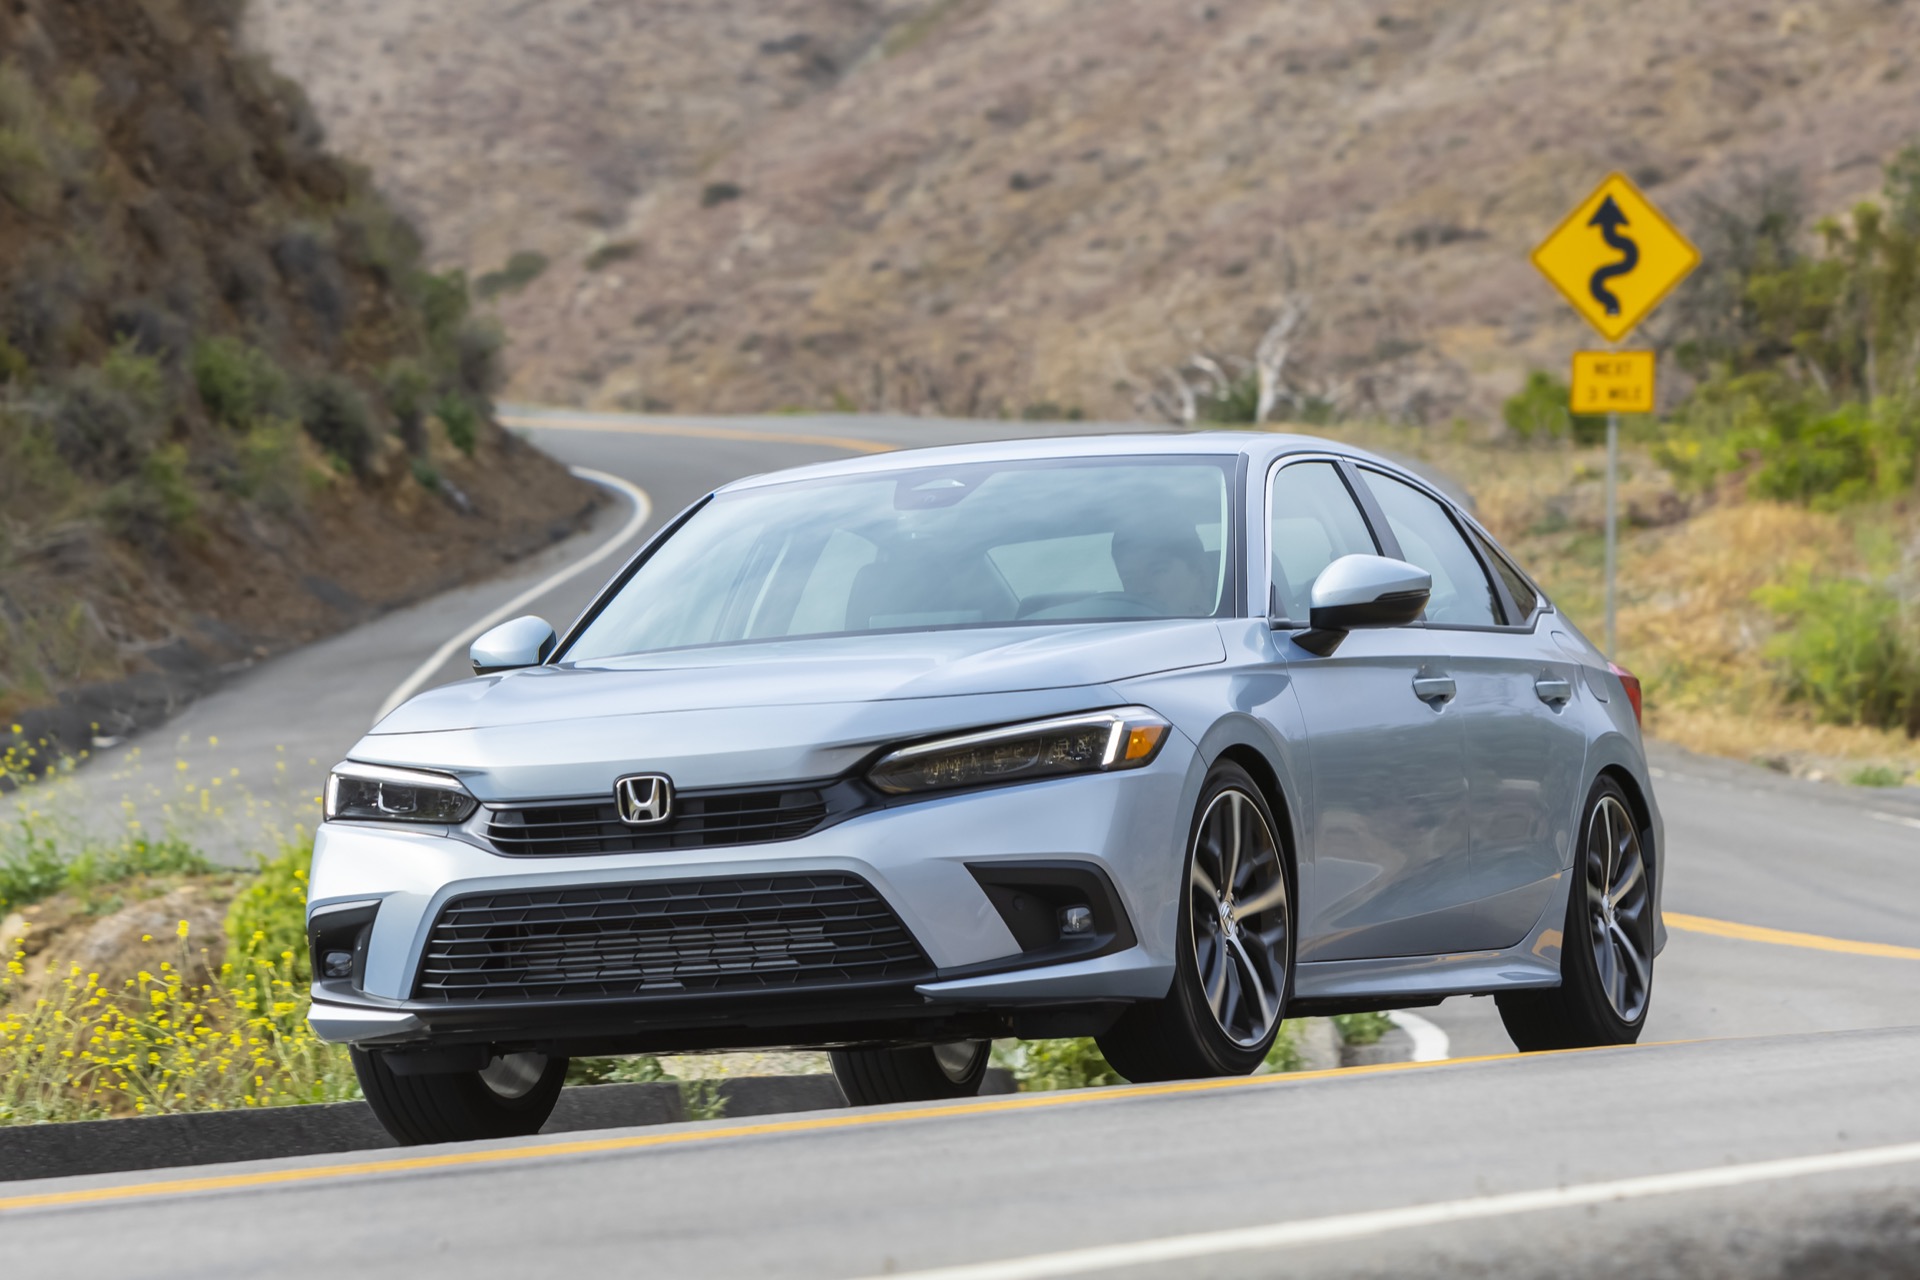 2025 Honda Civic Hybrid could catch 40% of Civic sales